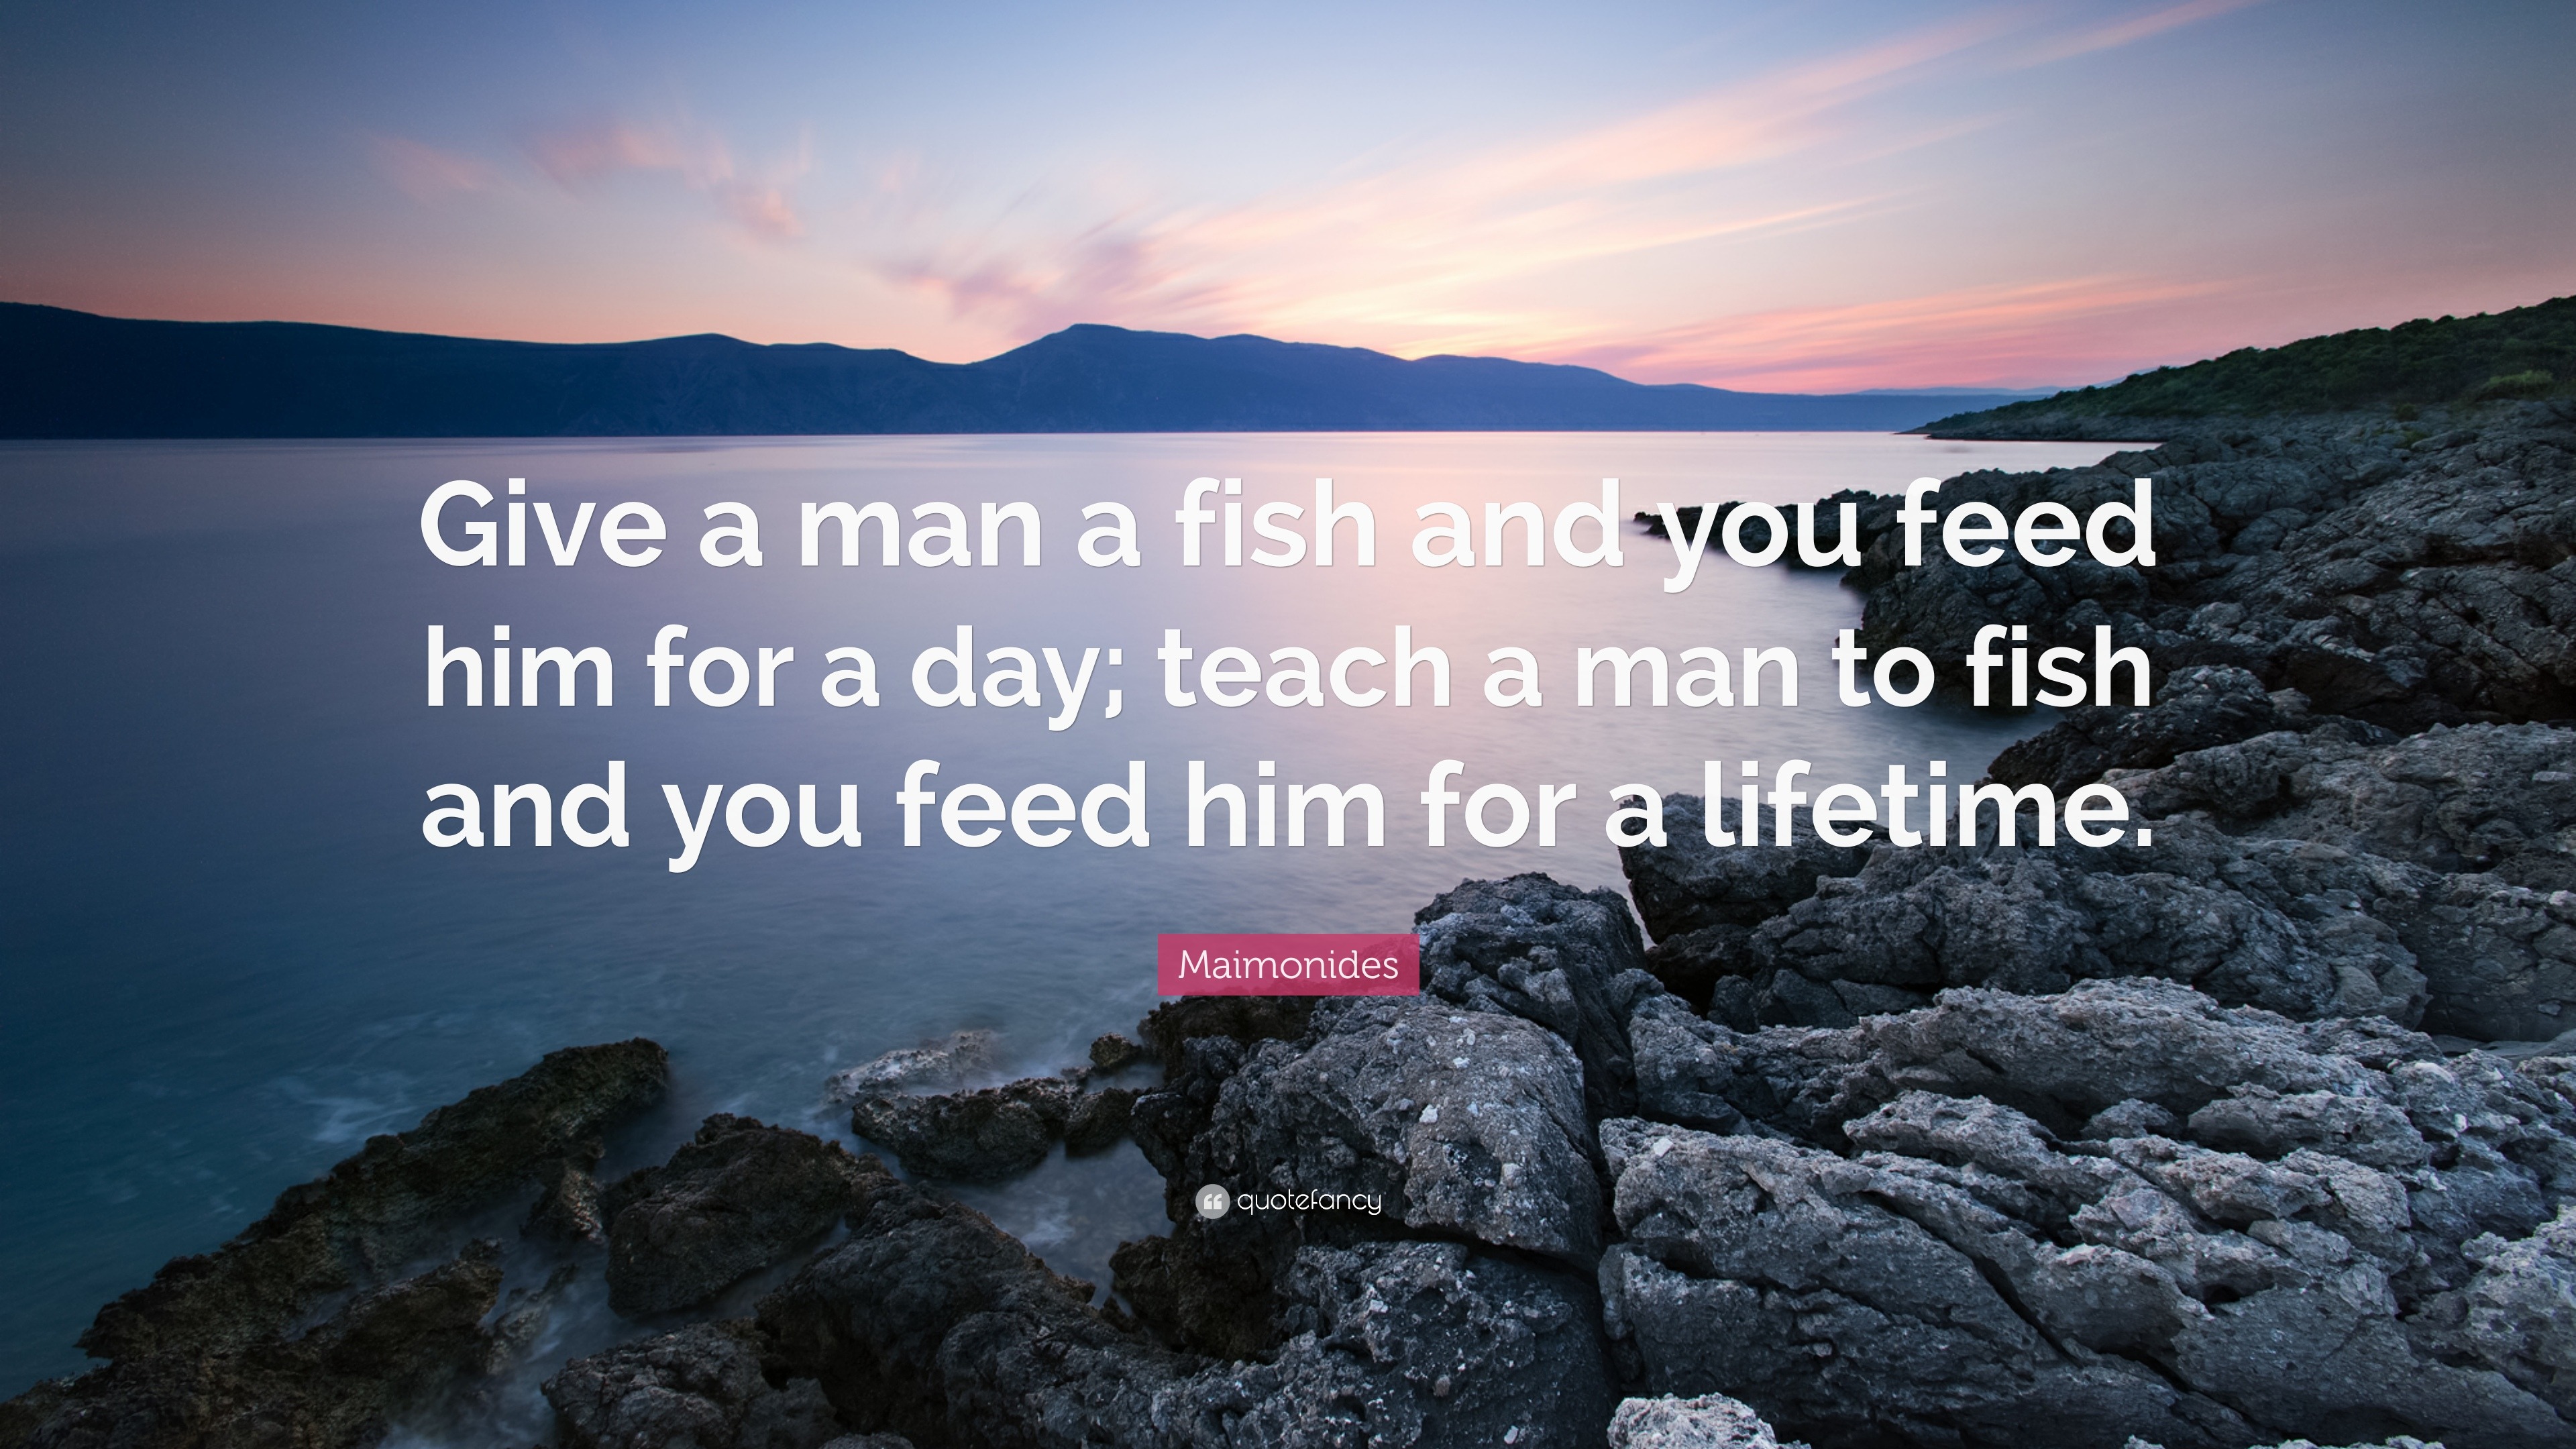 maimonides-quote-give-a-man-a-fish-and-you-feed-him-for-a-day-teach-a-man-to-fish-and-you